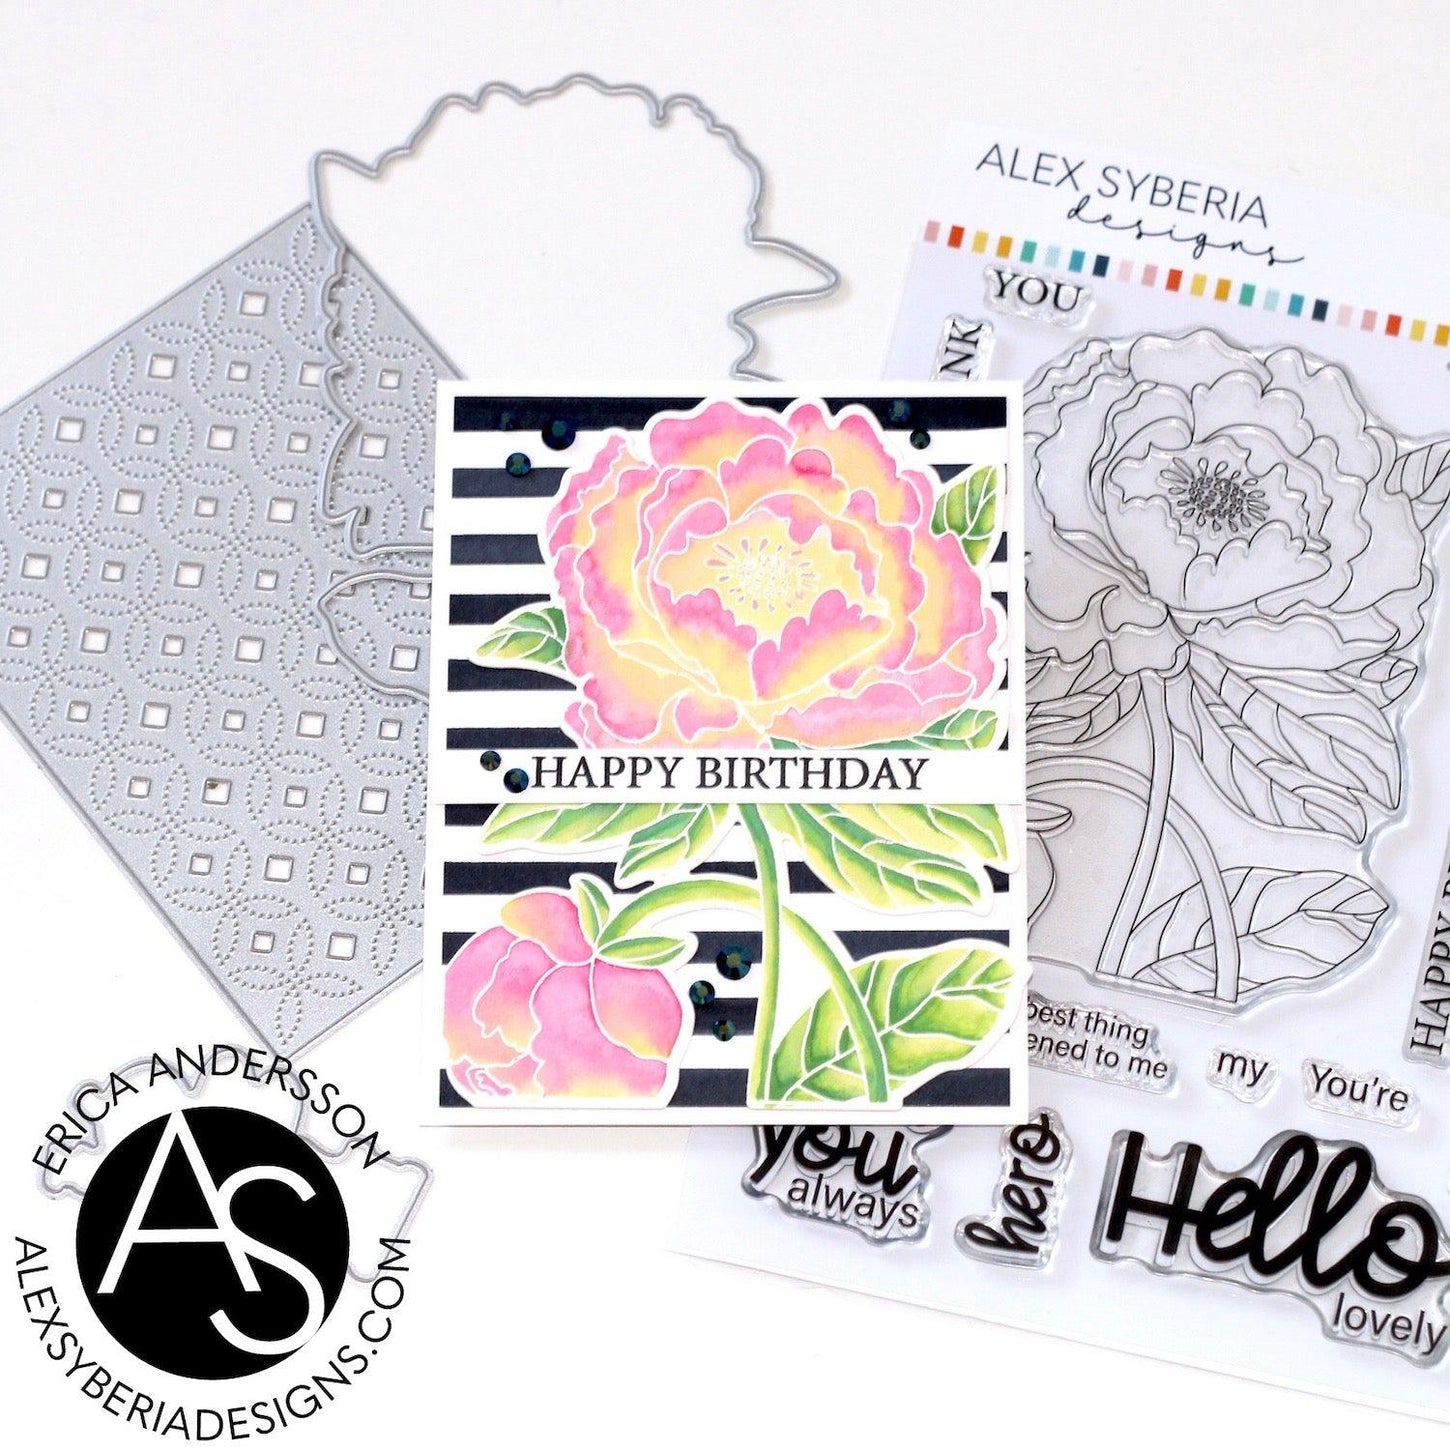 alex-syberia-designs-stamps-hello-lovely-fancy-background-die-cover-cardmaking-tutorials-tips-rainbow-cards-die-cutting-cover-plates-cardmakers-of-instagram-simon-says-stamps